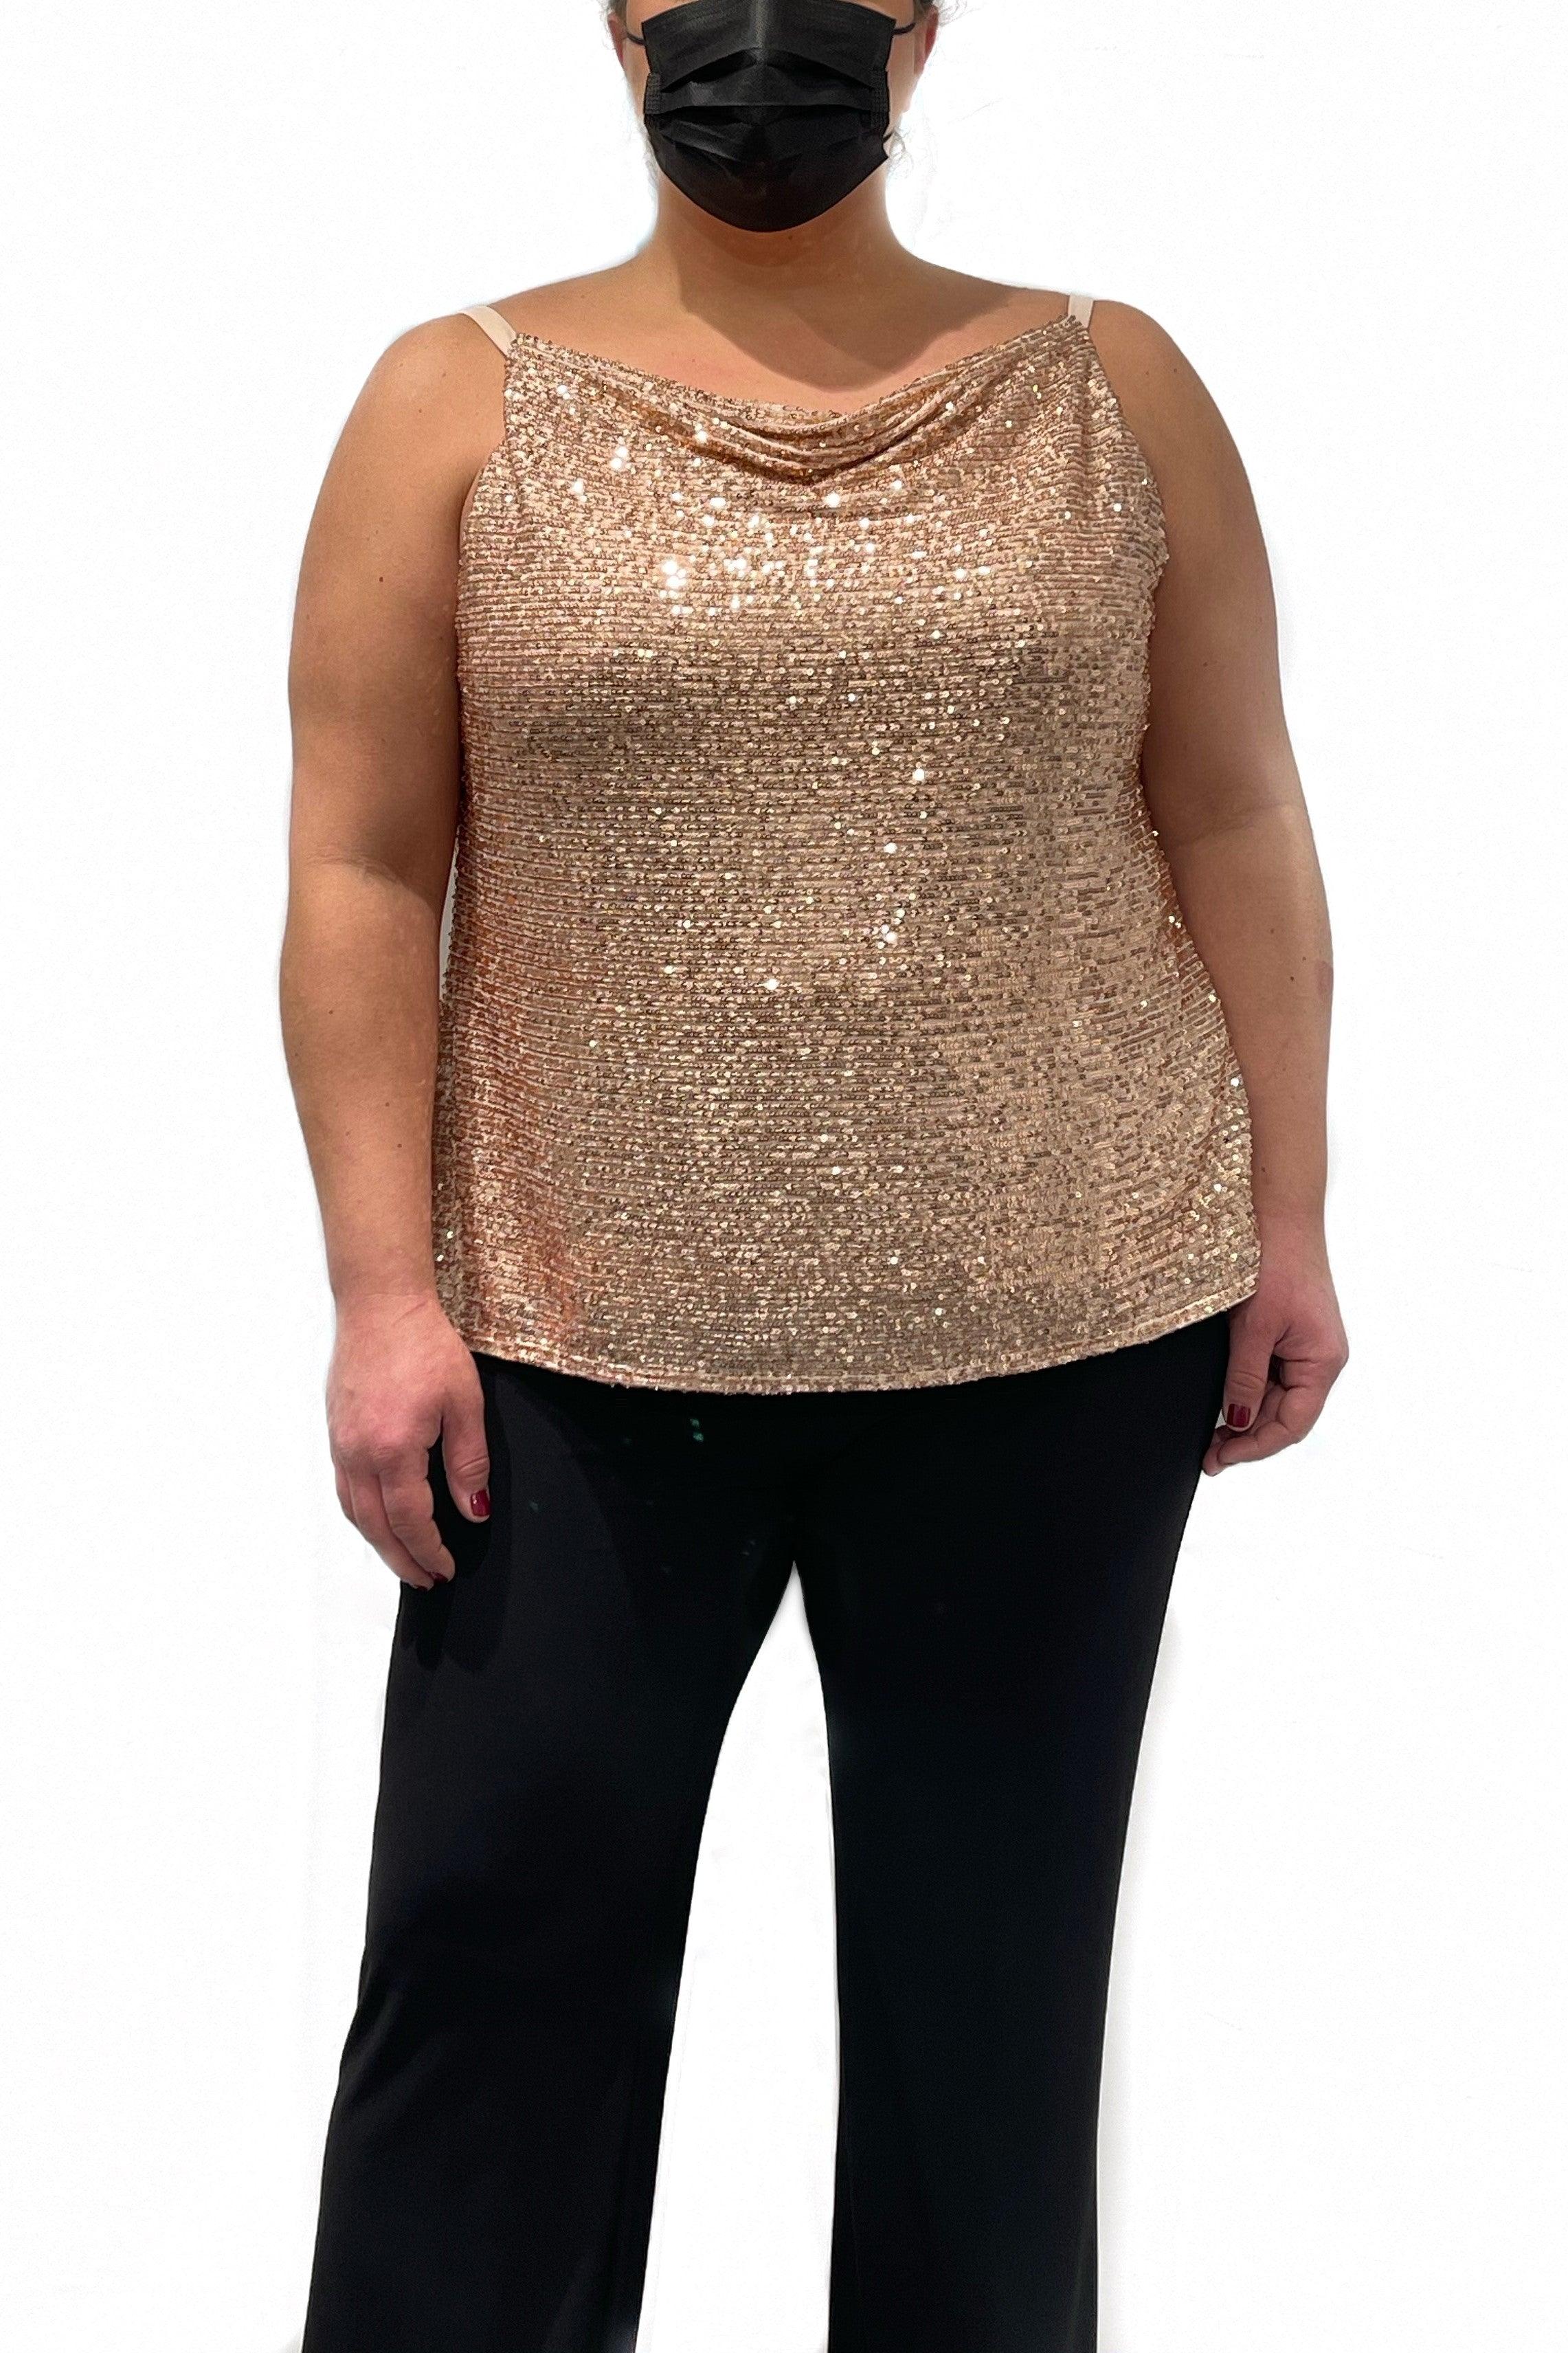 Nightway Formal Plus Size Sequined Top 22116W - The Dress Outlet